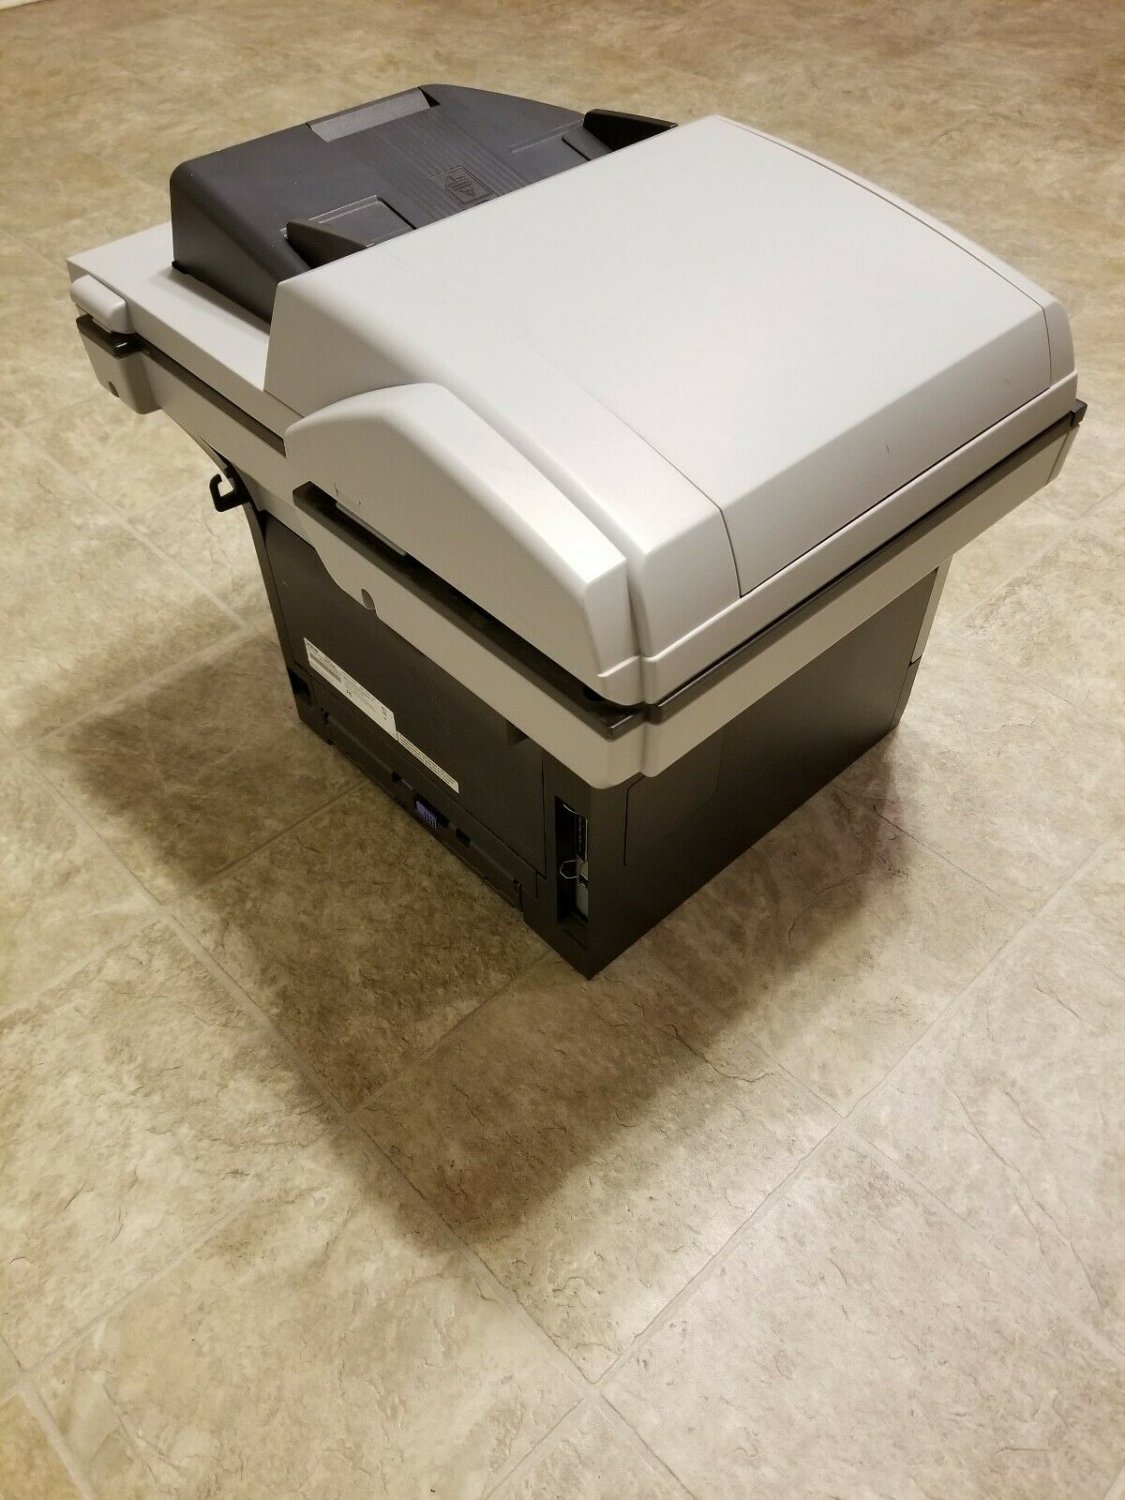 Brother Dcp 8060 All In One Laser Printer 5371